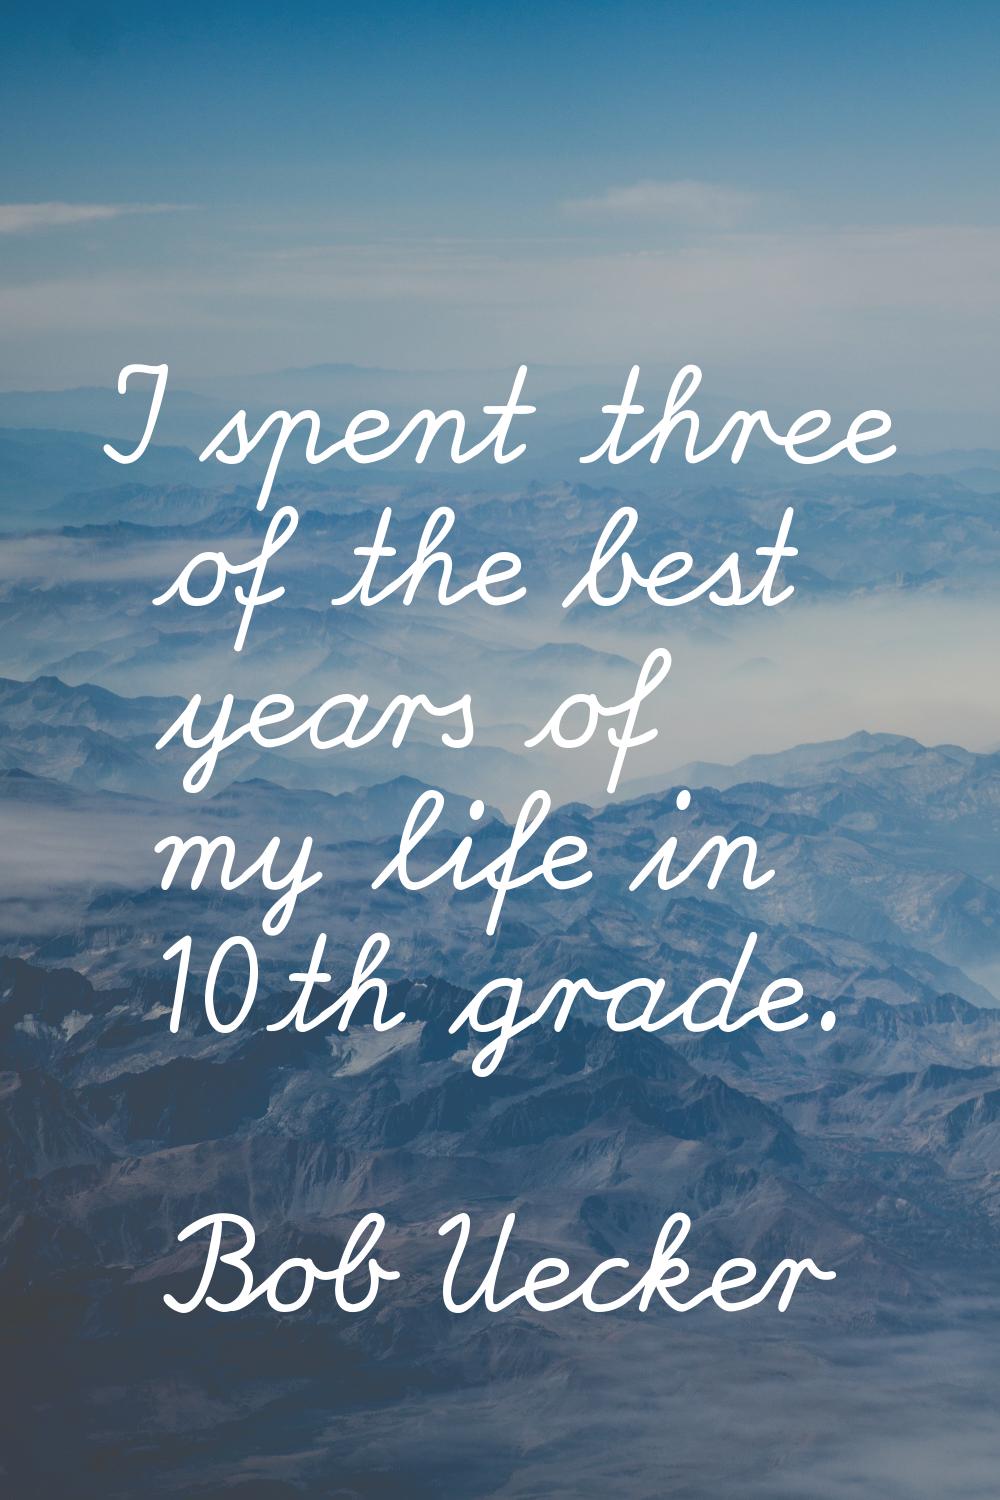 I spent three of the best years of my life in 10th grade.